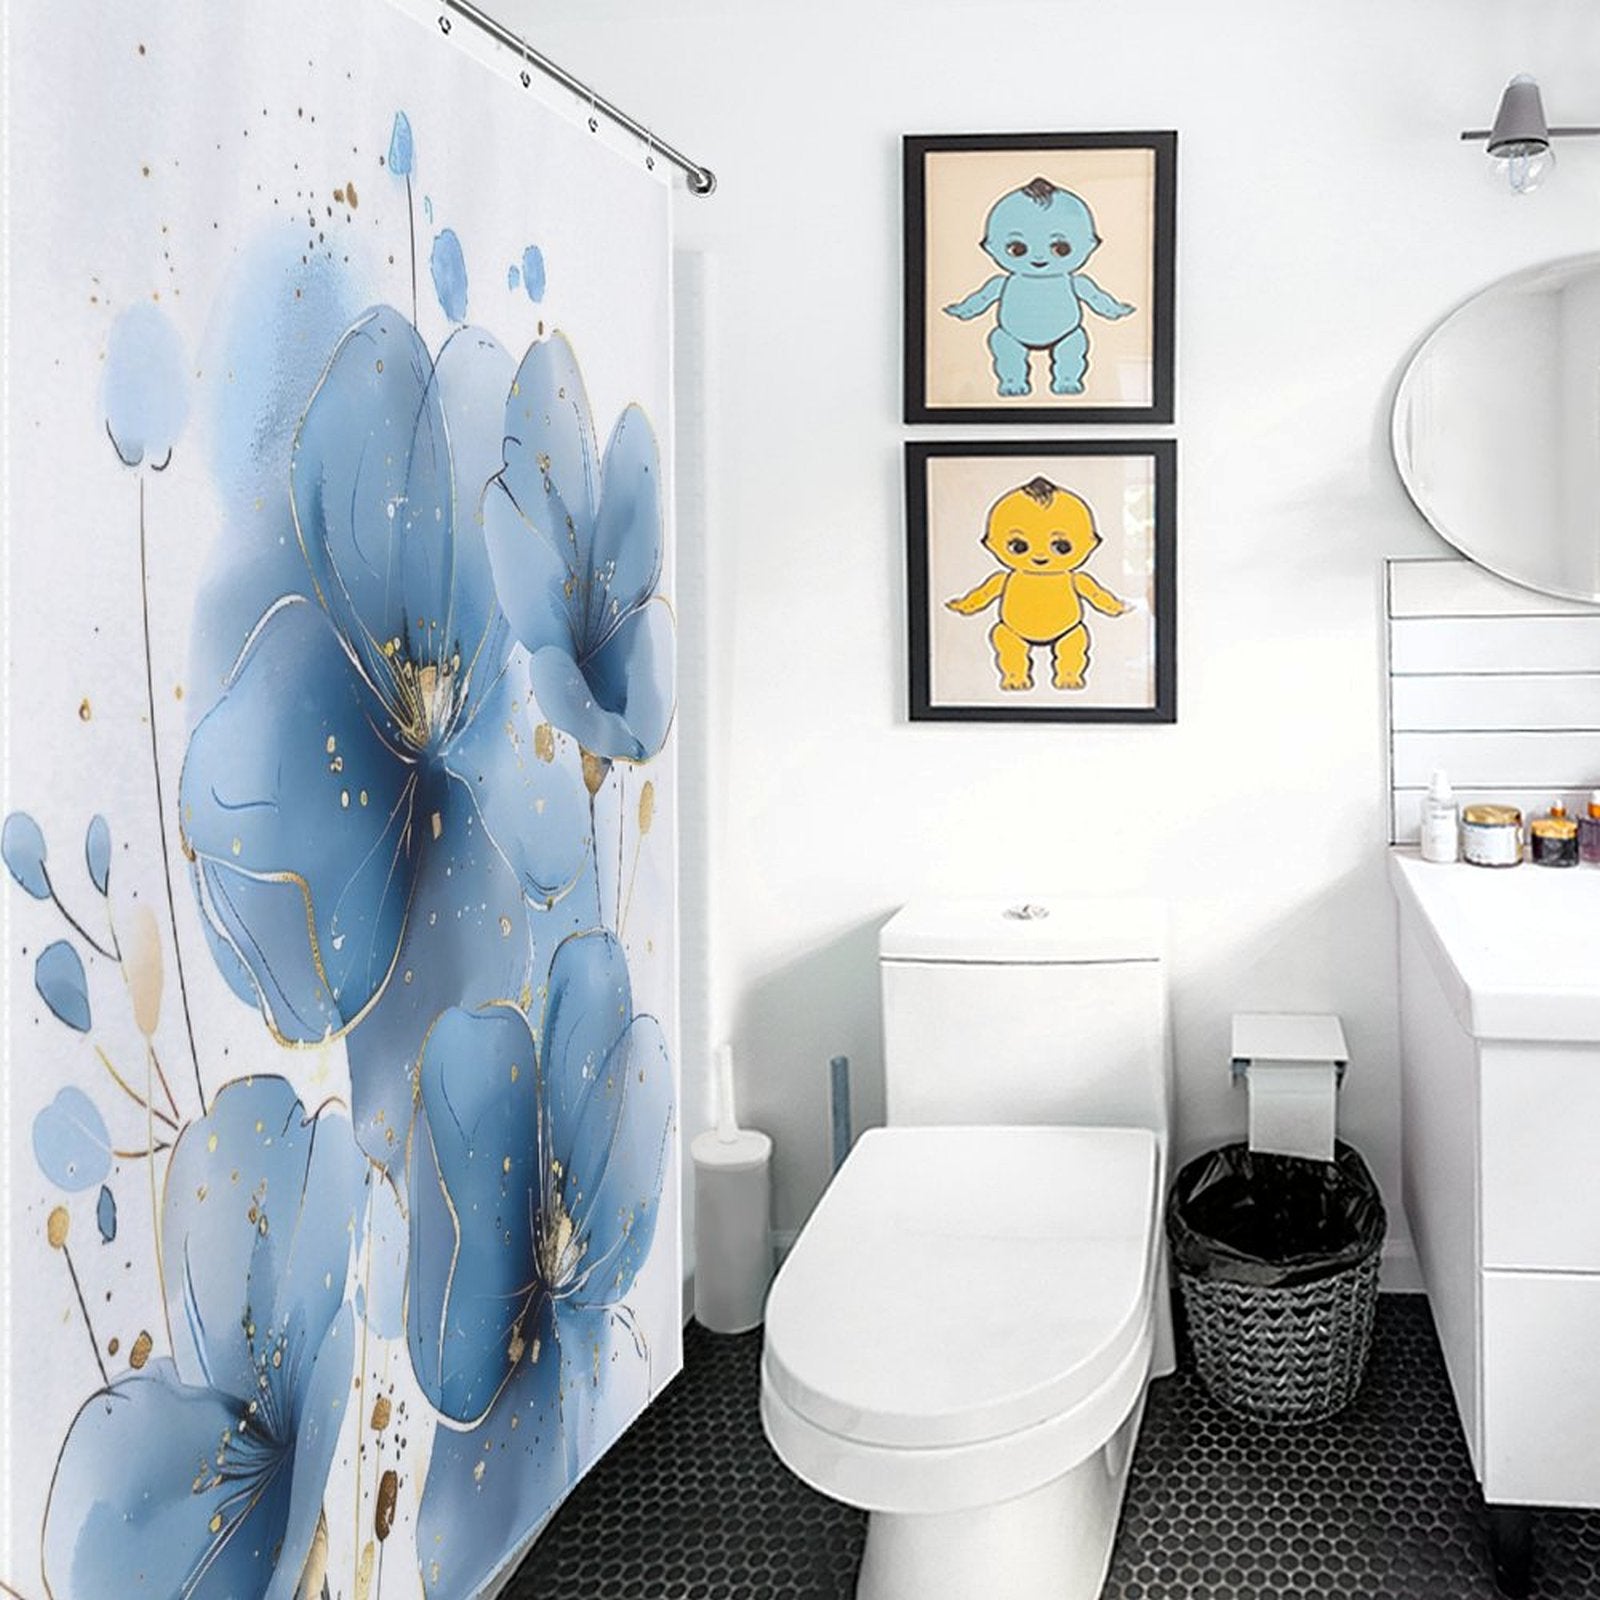 Bathroom with a white toilet, black wastebasket, and a minimalist sink with a mirror. Abstract Modern Art Blue Flower Minimalist Watercolor Blue Floral Shower Curtain-Cottoncat by Cotton Cat and two framed pictures of blue and yellow cartoon figures on the wall, featuring abstract modern art.